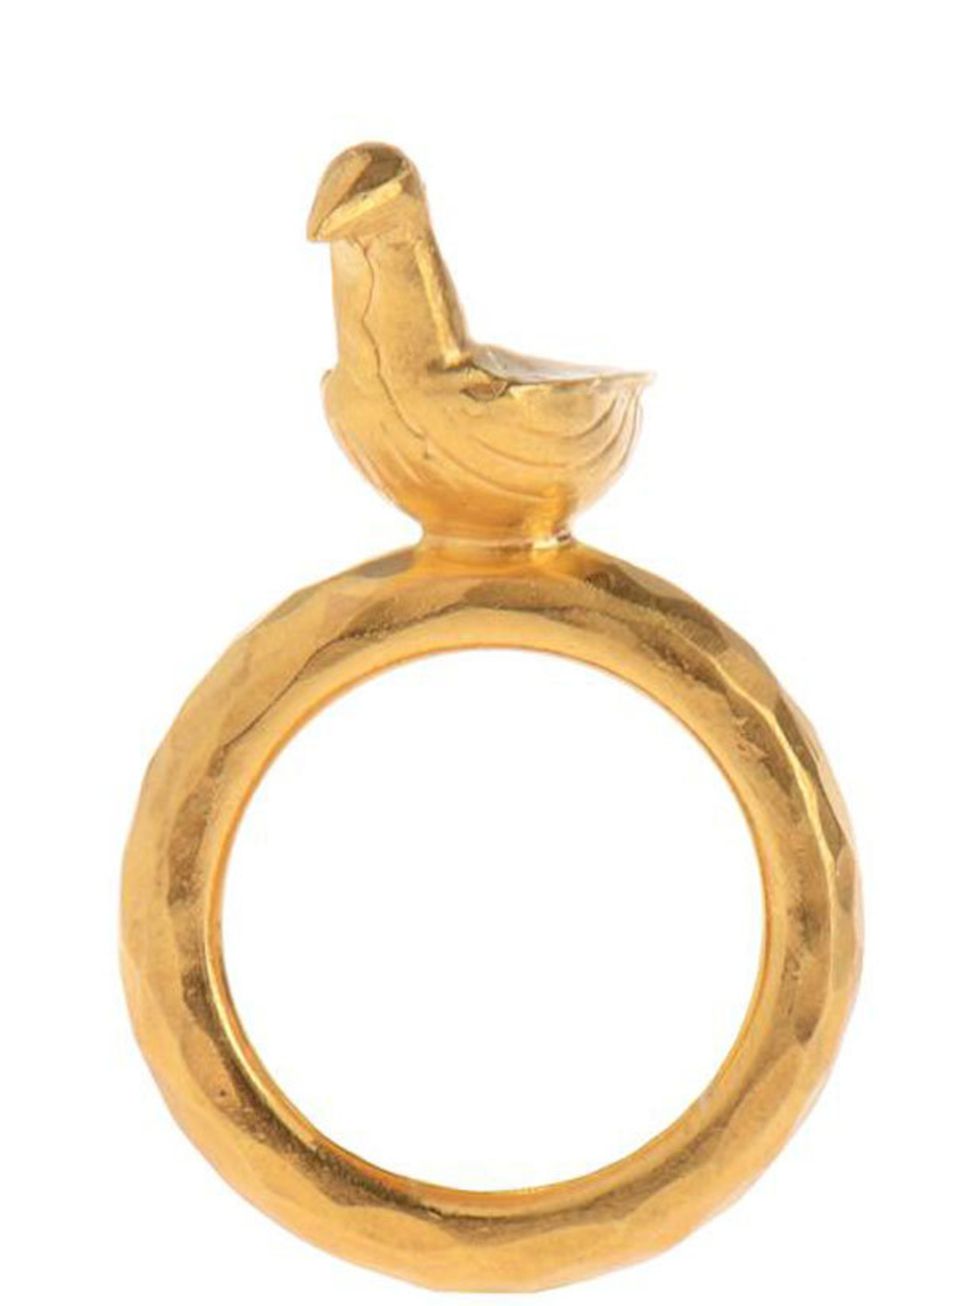 <p>If you buy one thing this week, make it Noors love bird ring. How could you possibly resist?... Noor love bird ring, £140, at <a href="http://www.brownsfashion.com/Product/Love_Bird_24k_gold_plated_ring/Product.aspx?p=3523771">Browns</a></p>